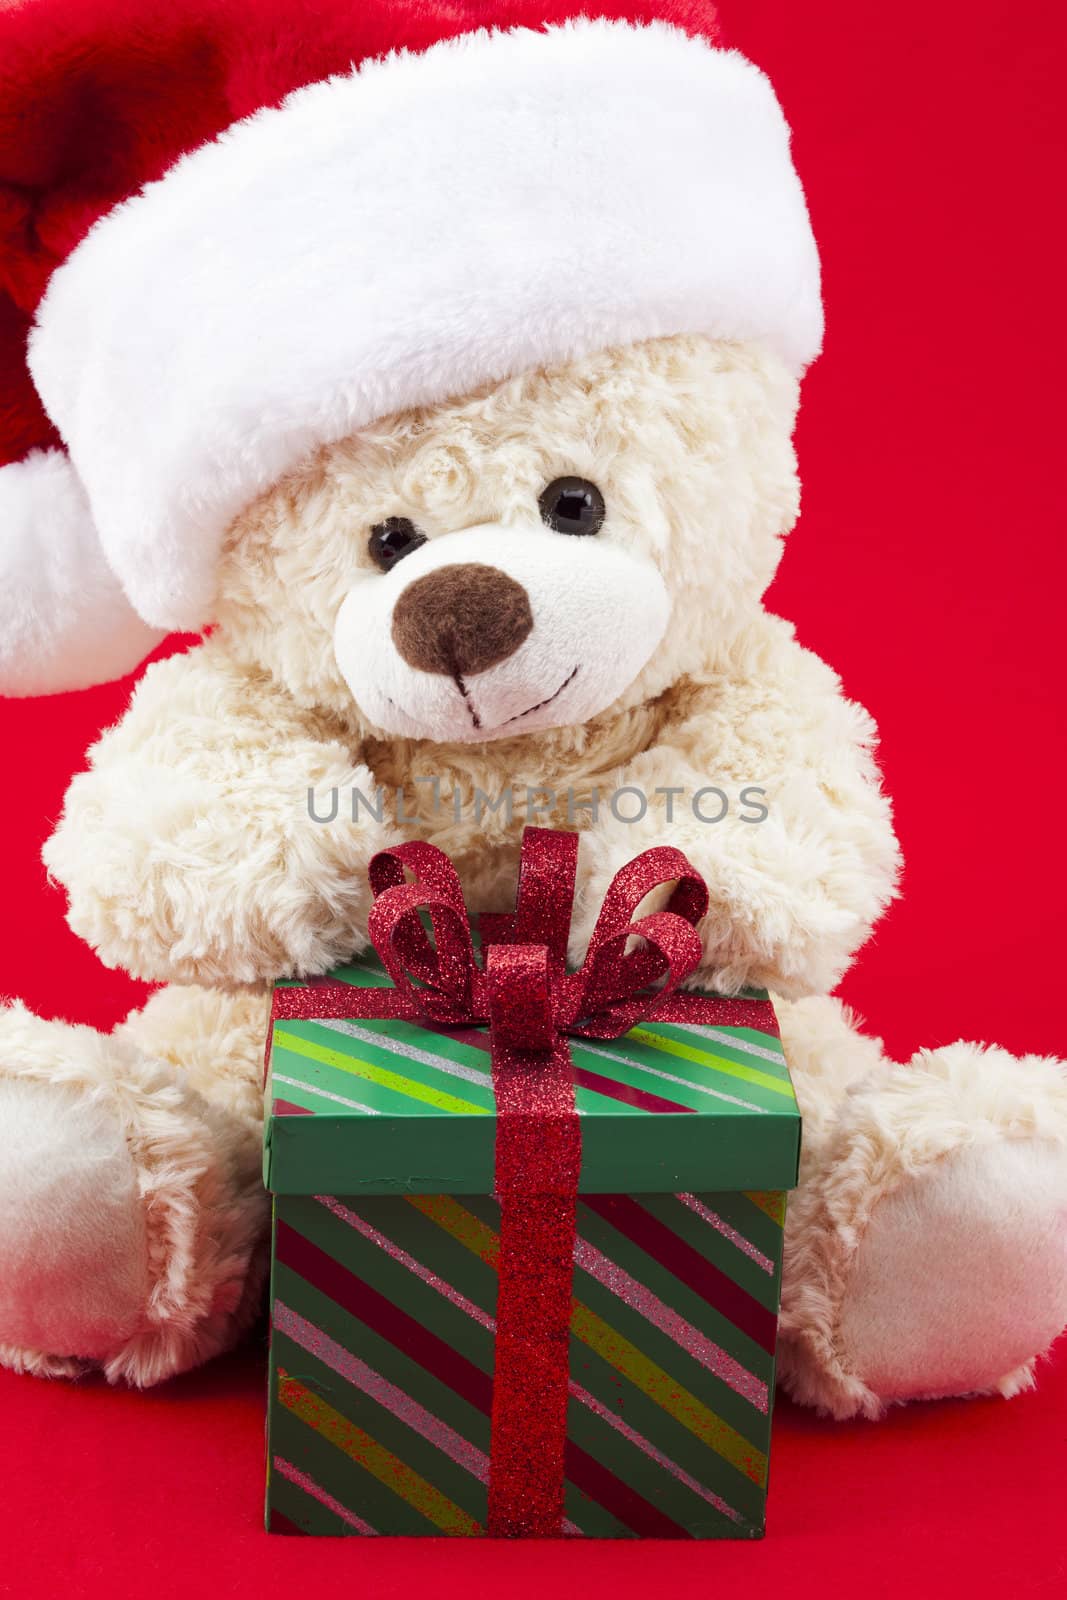 Teddy bear wearing a Santa hat is sitting in front of a unopened gift, on a red background. 